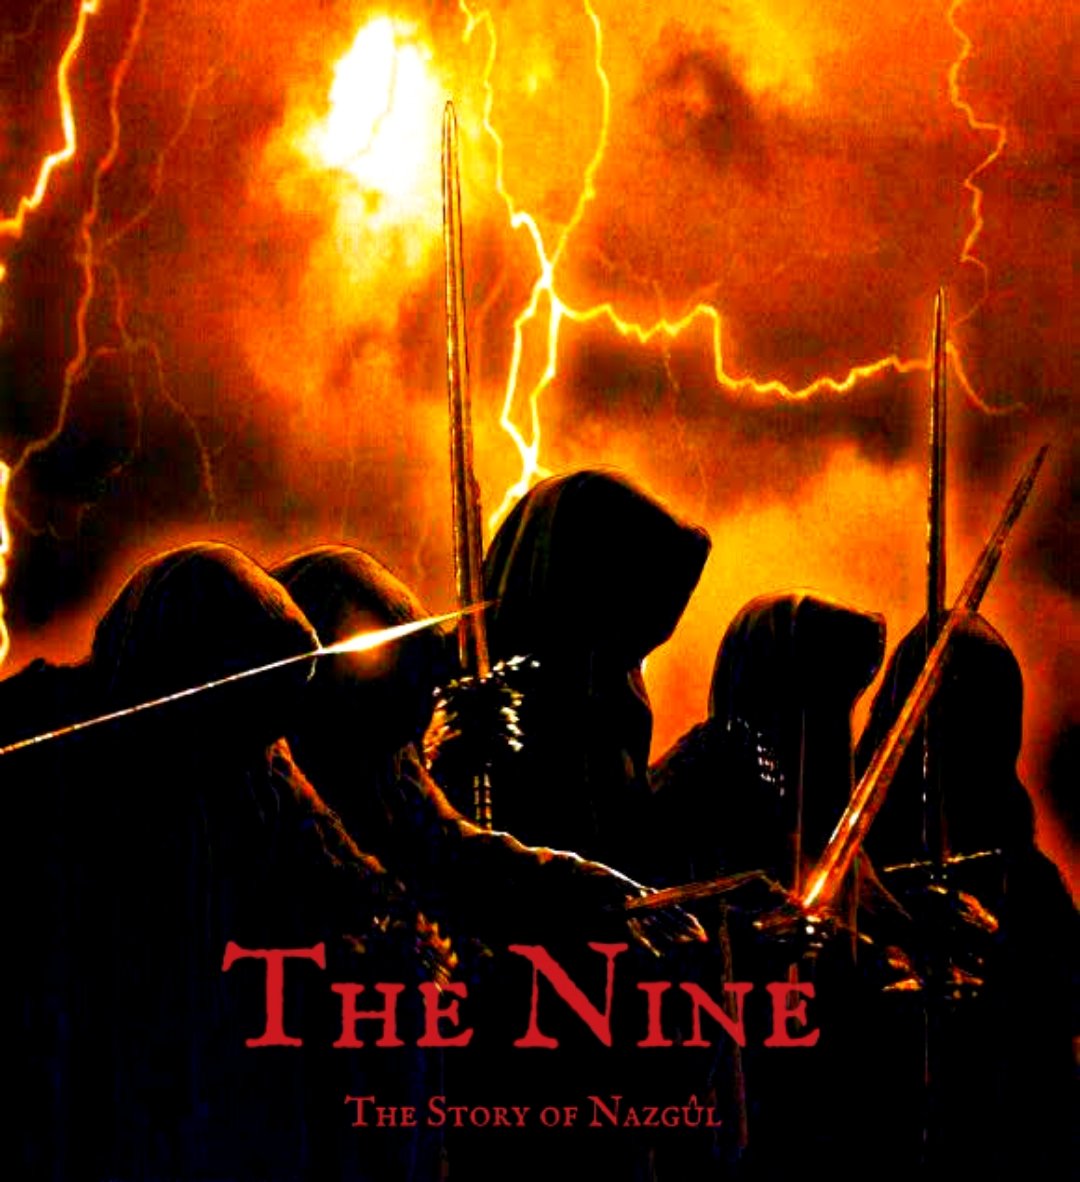 The Nine: the Story of the Nazgûl is Coming Soon 

#nazgul #ringwraiths #witchking #darkness #evil #minasmorgul